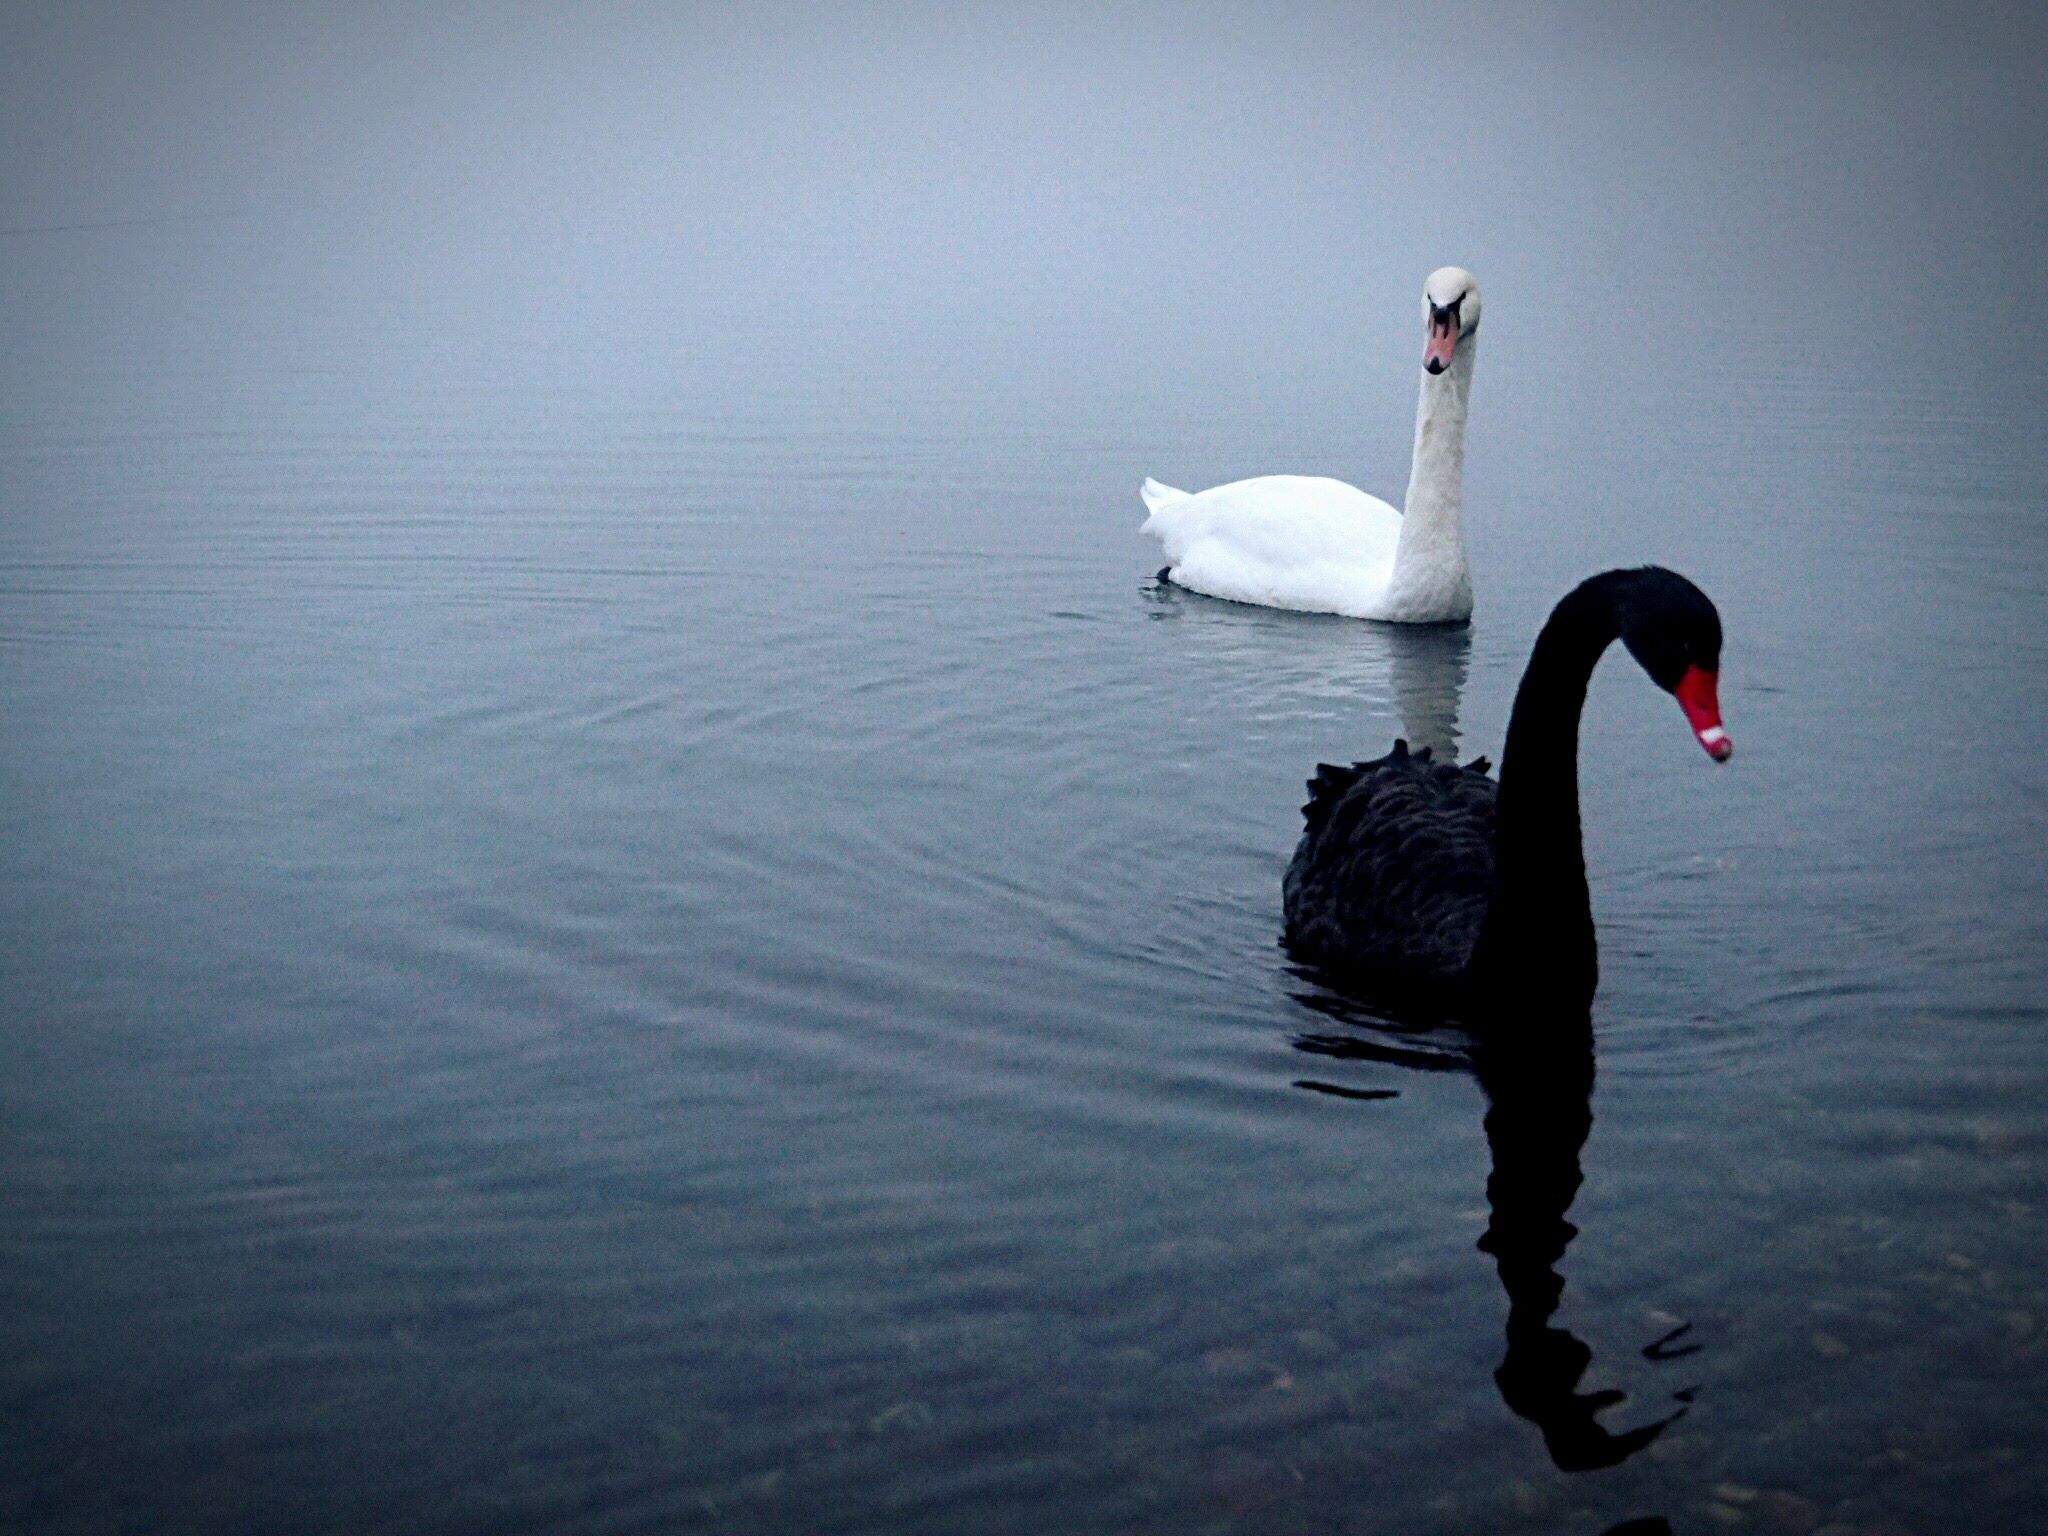 An early black swan for black gold?